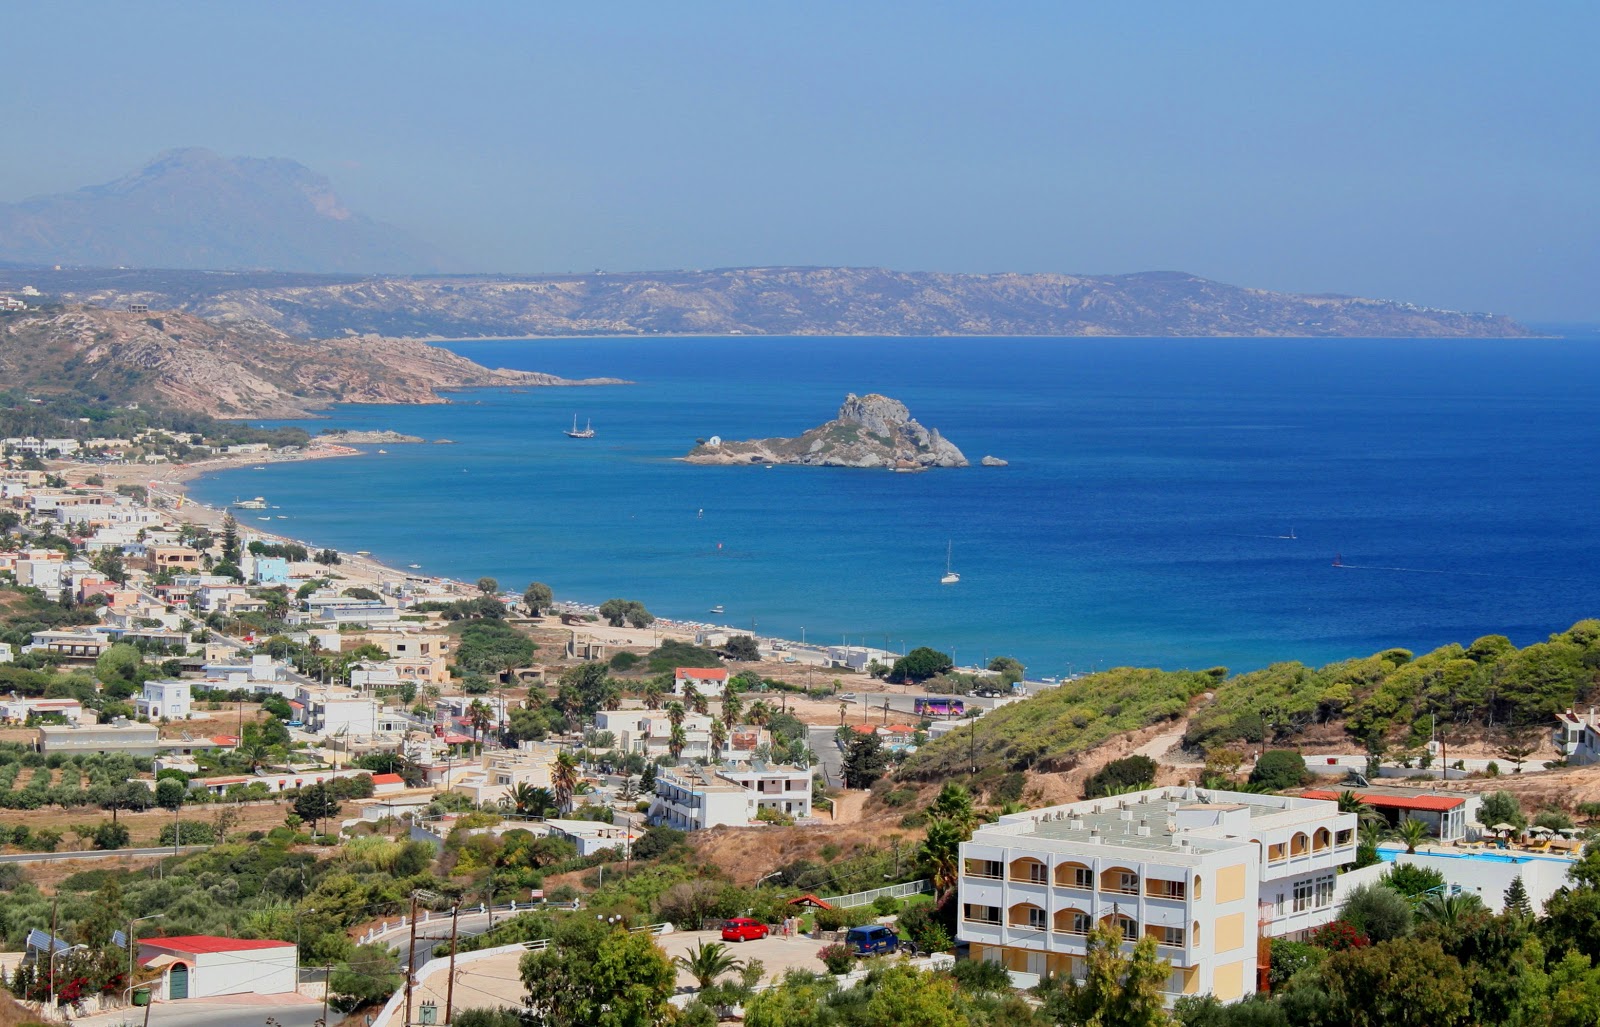 Photo of Agios Stefanos and its beautiful scenery